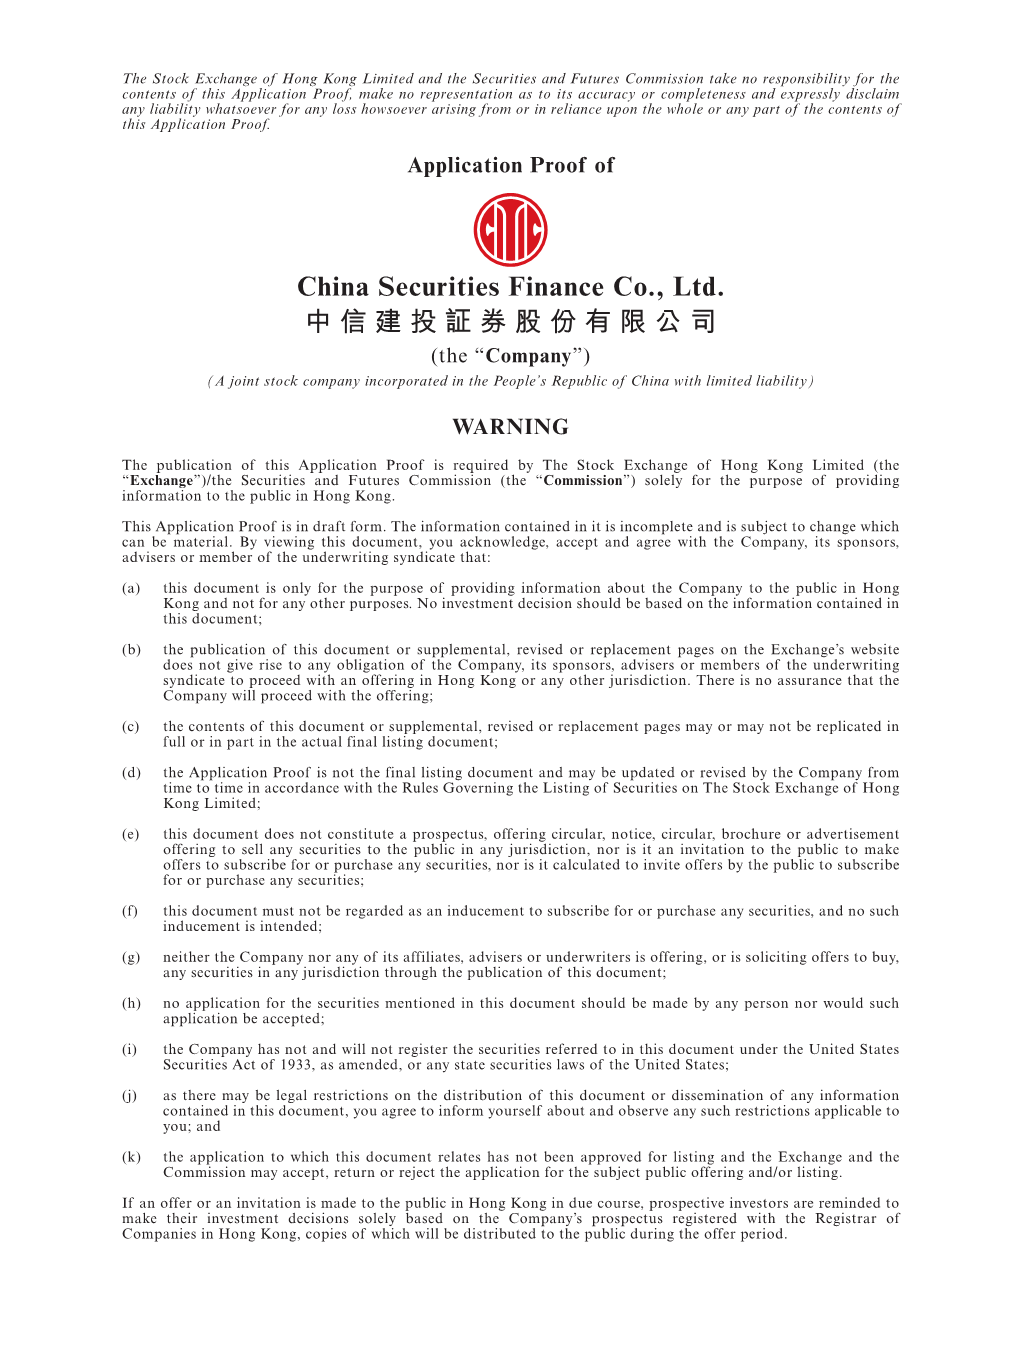 China Securities Finance Co., Ltd. 中信建投証券股份有限公司 (The “Company”) (A Joint Stock Company Incorporated in the People’S Republic of China with Limited Liability)